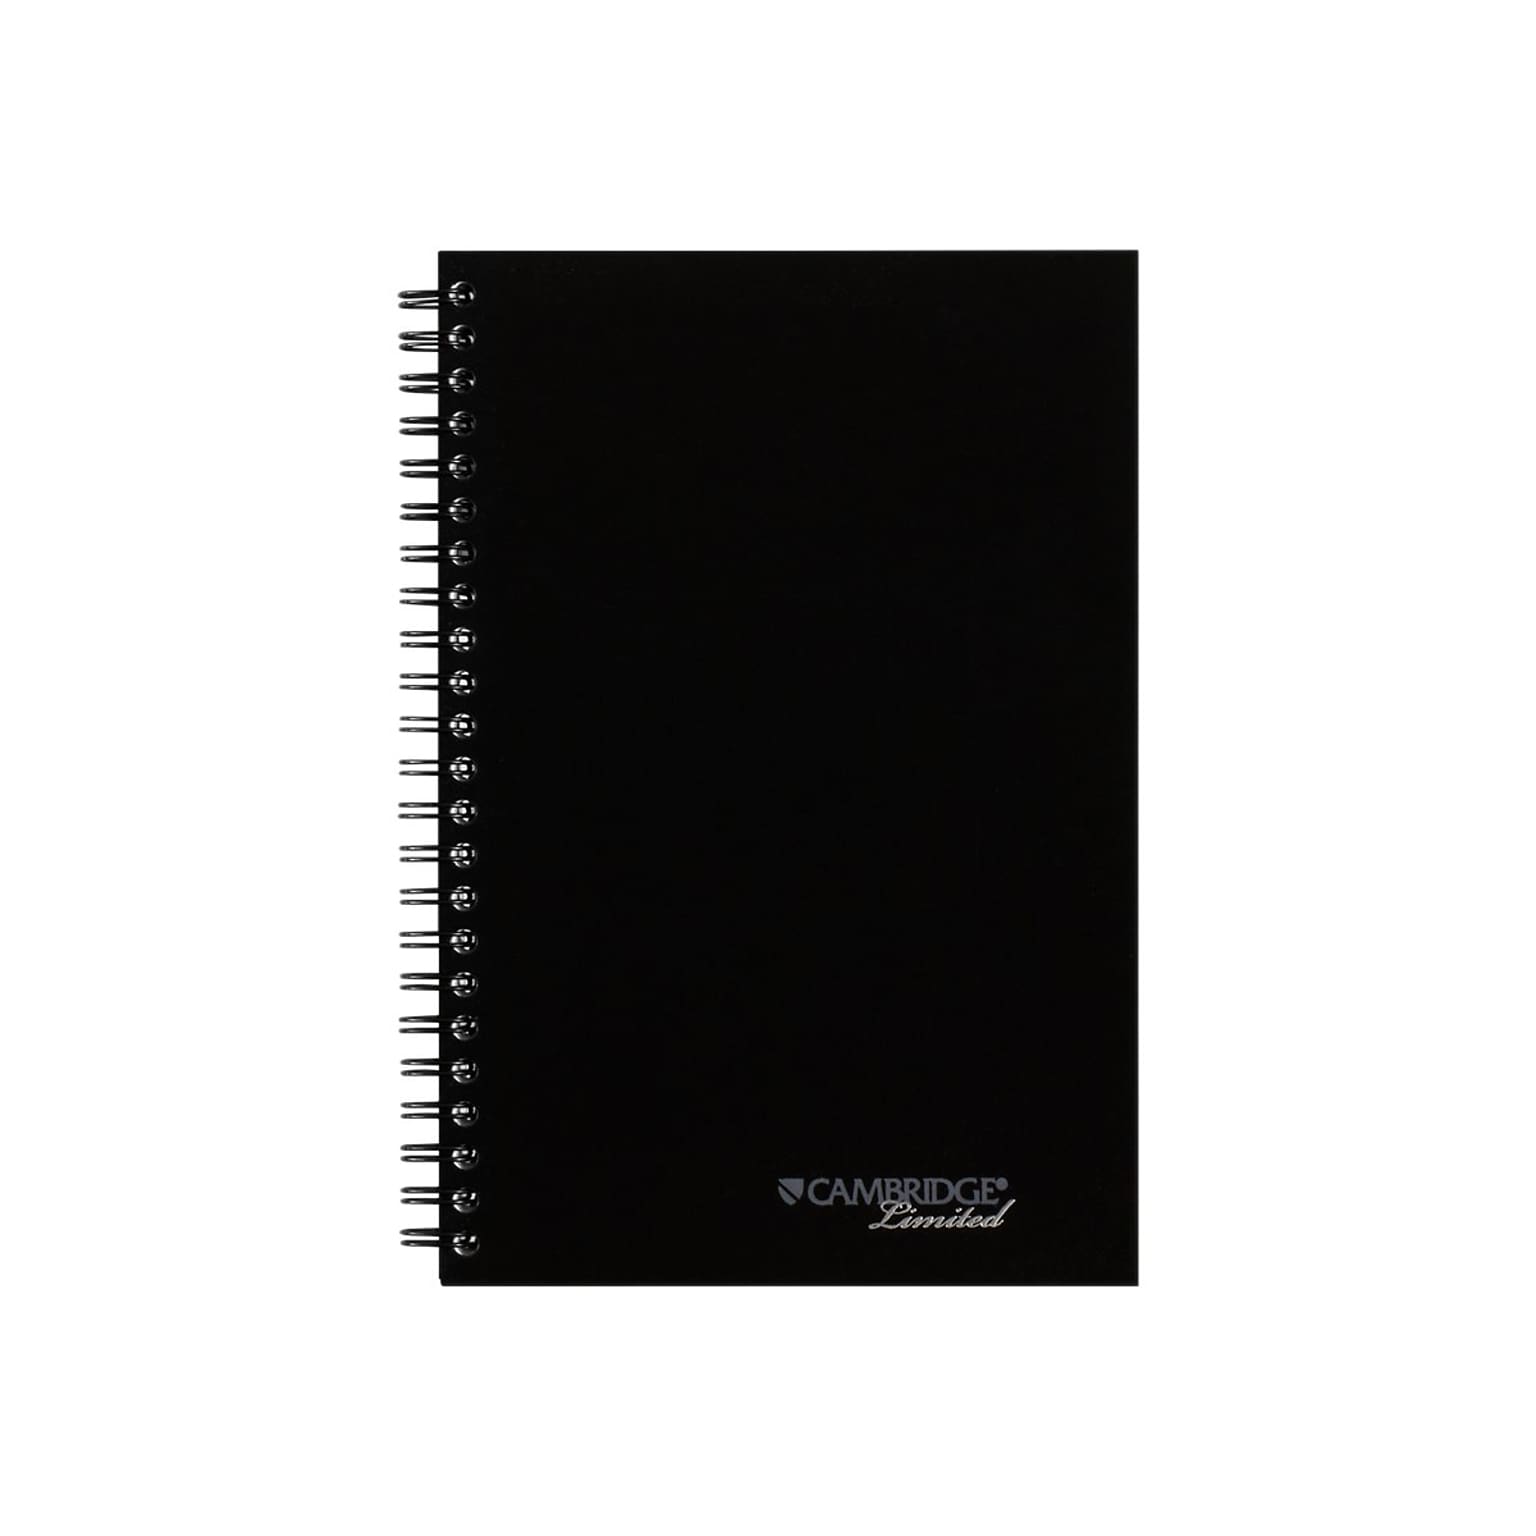 AT-A-GLANCE Professional Notebooks, 5 x 8, College Ruled, 80 Sheets, Black (06096)